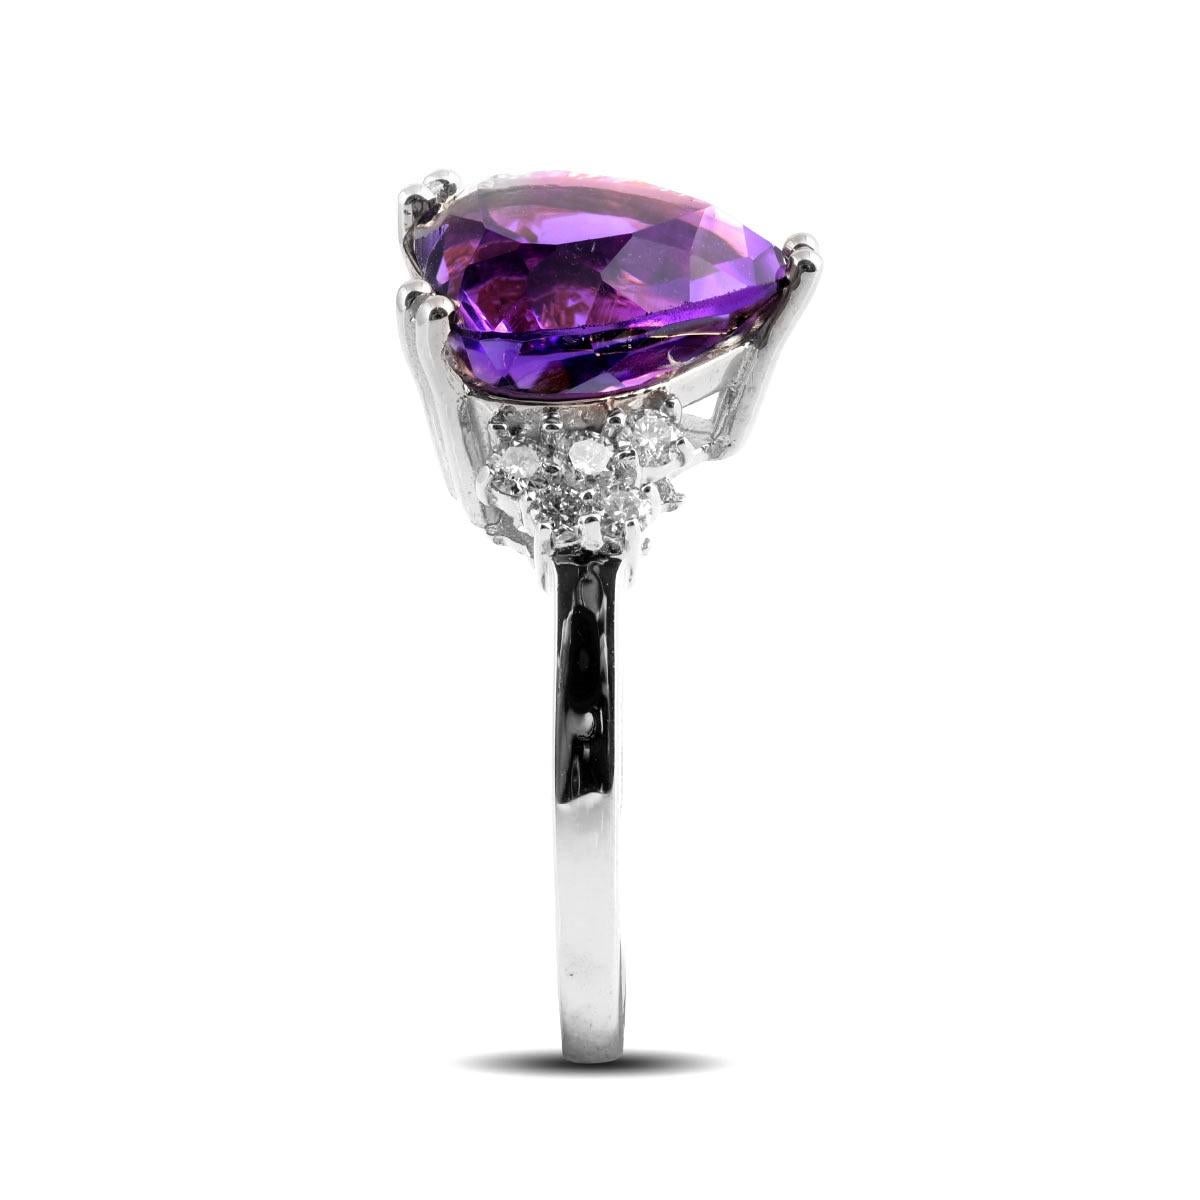 Mixed Cut 3.55 Carats Amethyst Diamonds set in 14K White Gold Ring For Sale